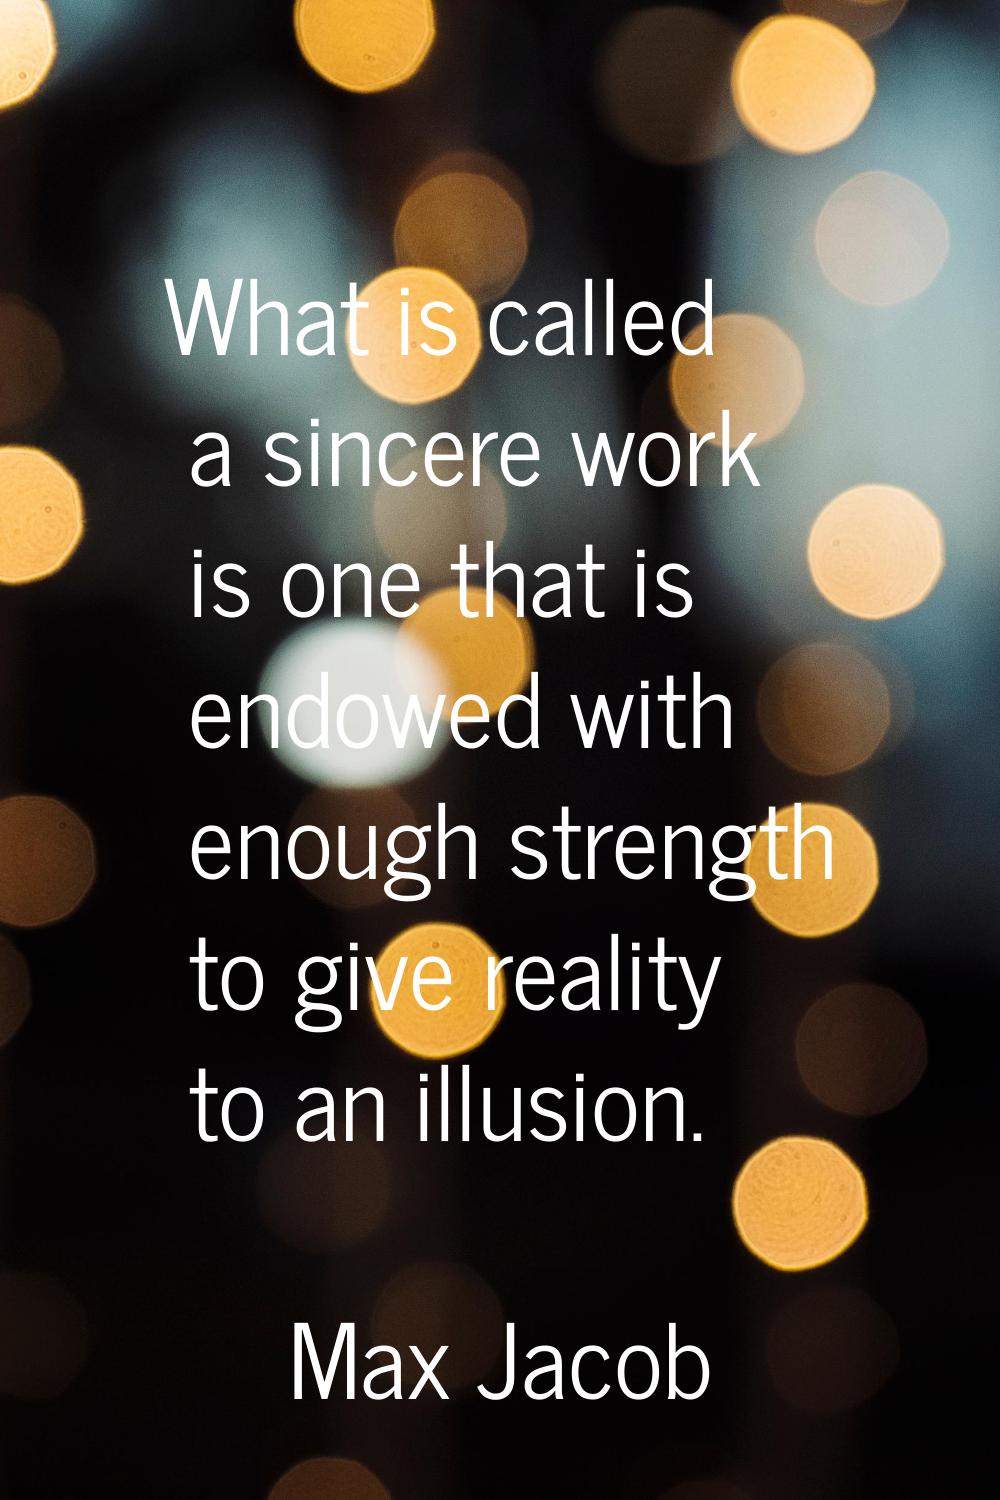 What is called a sincere work is one that is endowed with enough strength to give reality to an ill